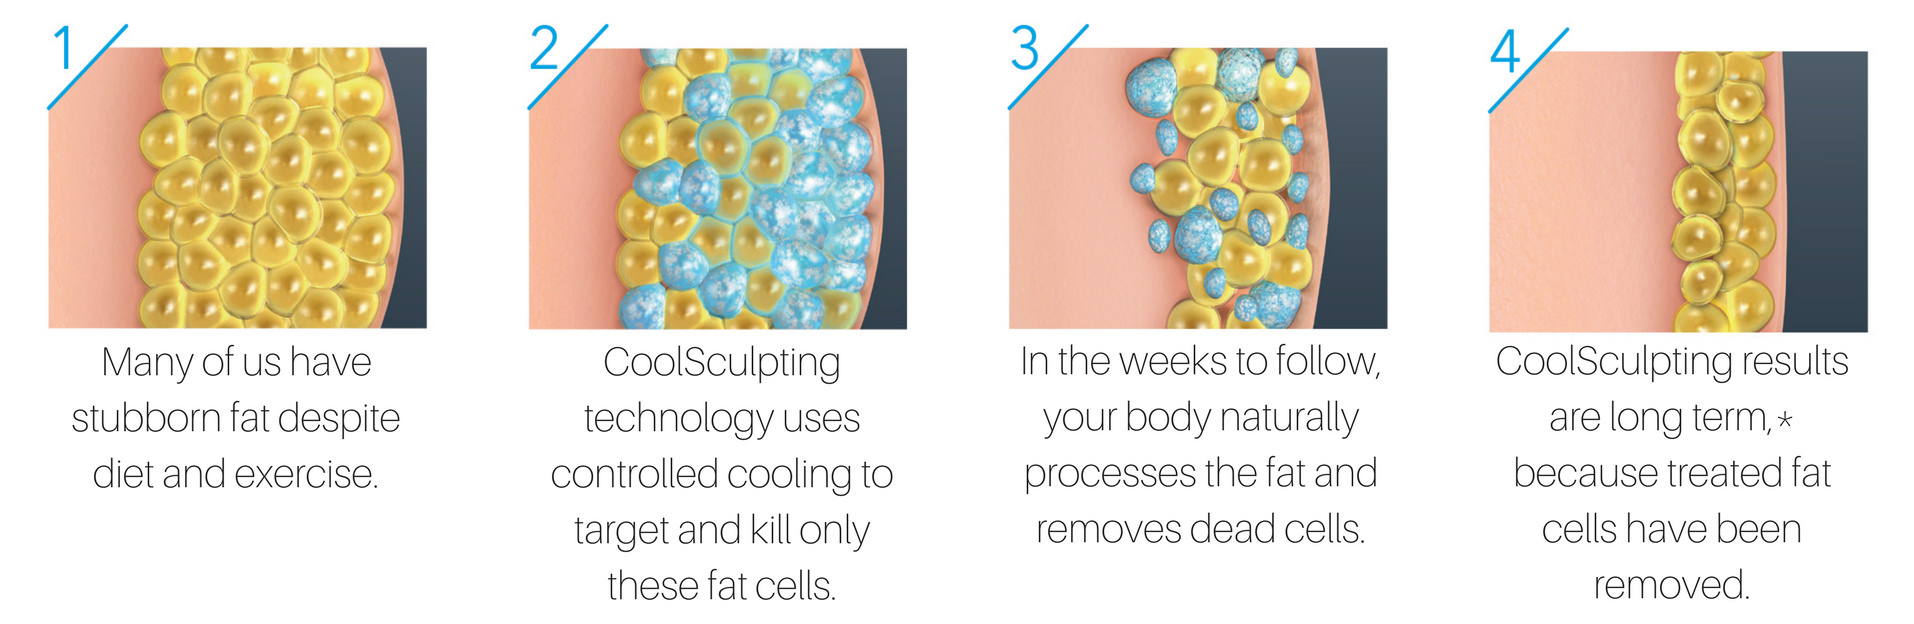 Graphic showing how coolsculpting work, freezing fat cells that naturally eliminate from the body and shrink permanently.